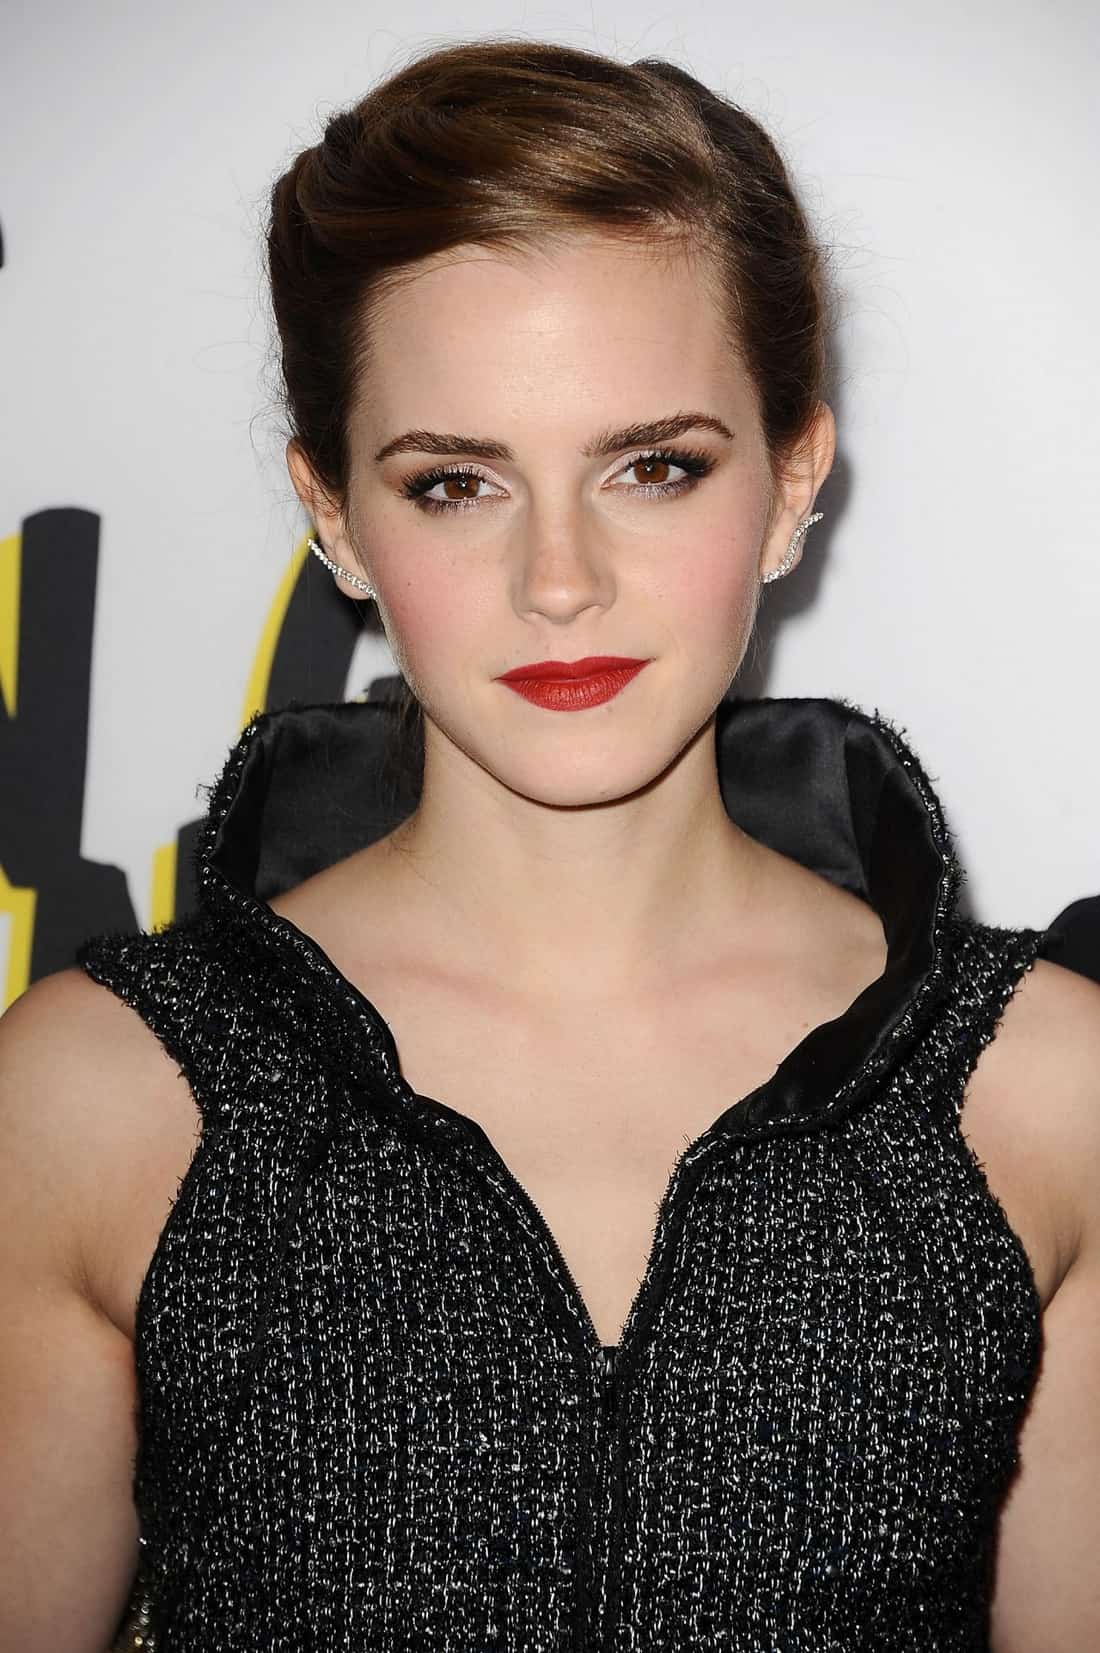 Emma Watson in a Black Zipper Mini Dress at the "The Bling Ring" Premiere